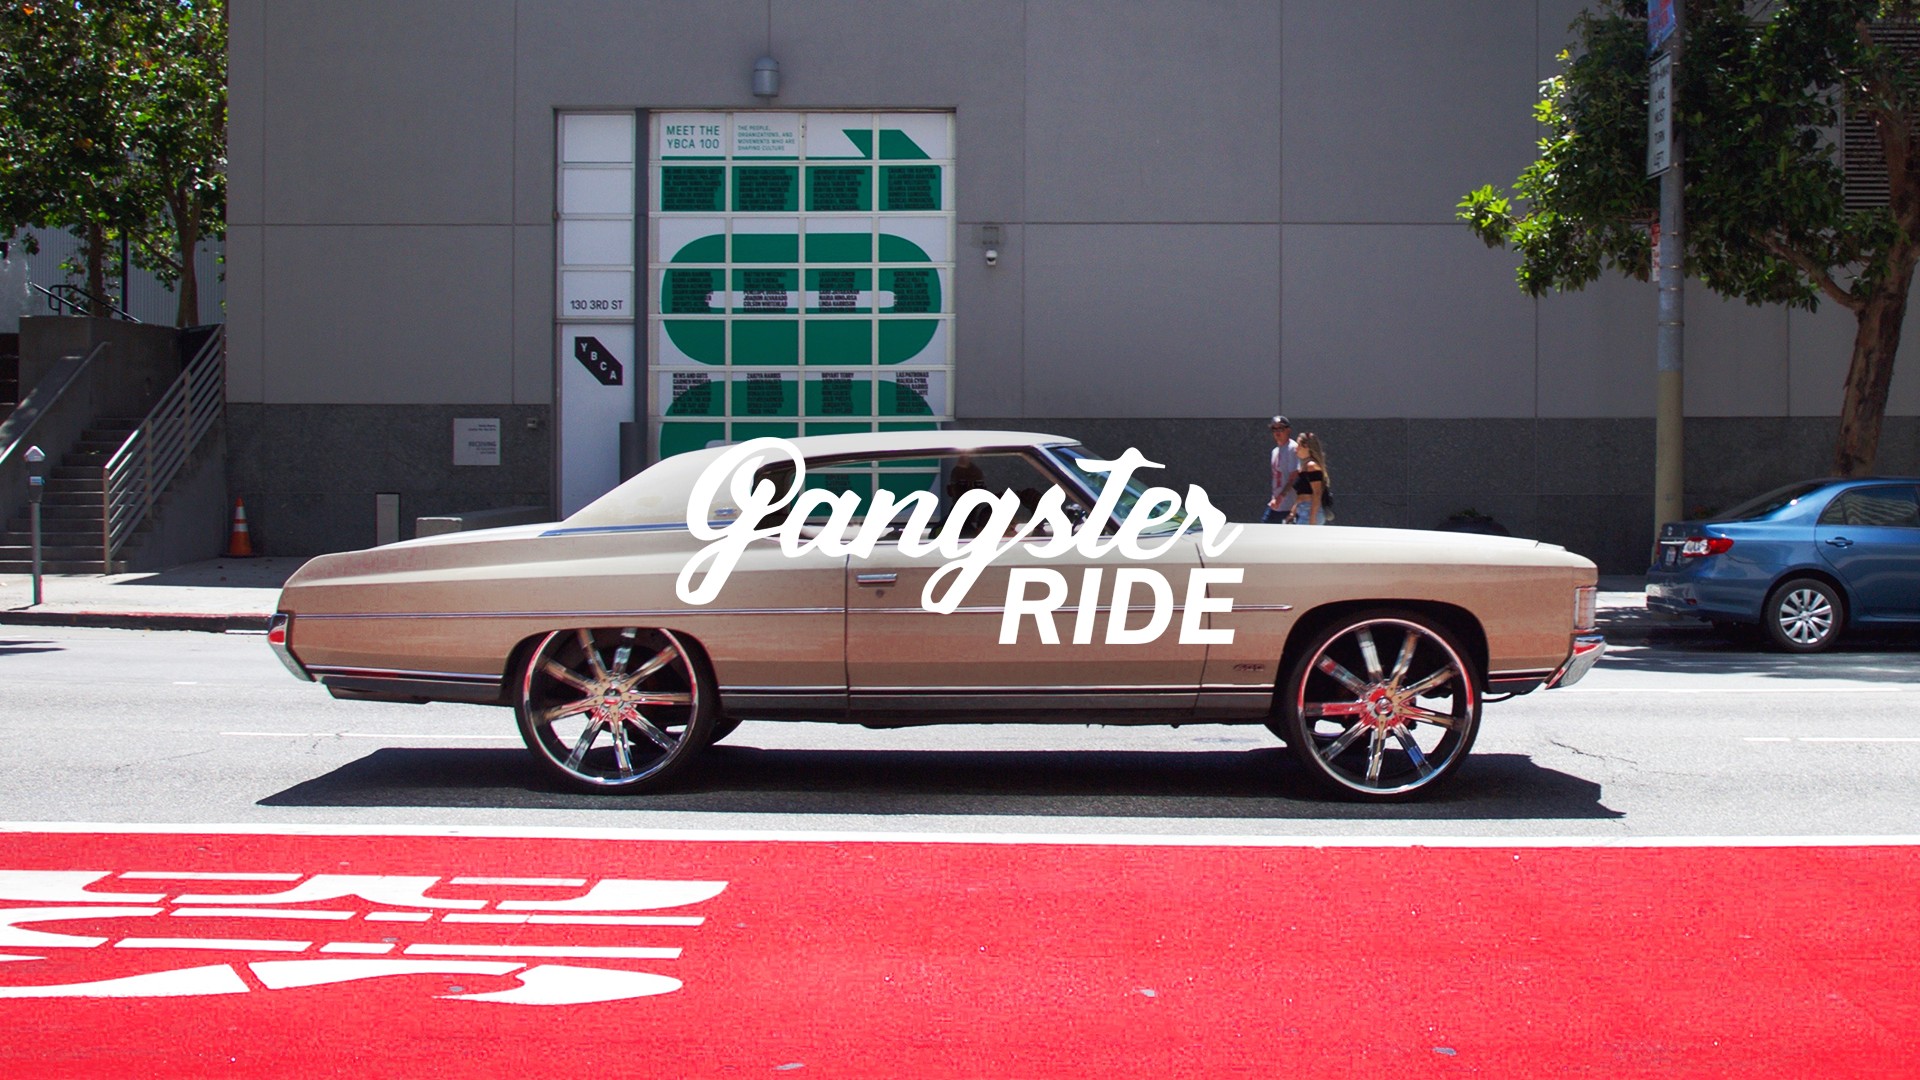 GANGSTER RIDE, Gangsters, Gangster, Car, Colorful, YouTube Wallpaper